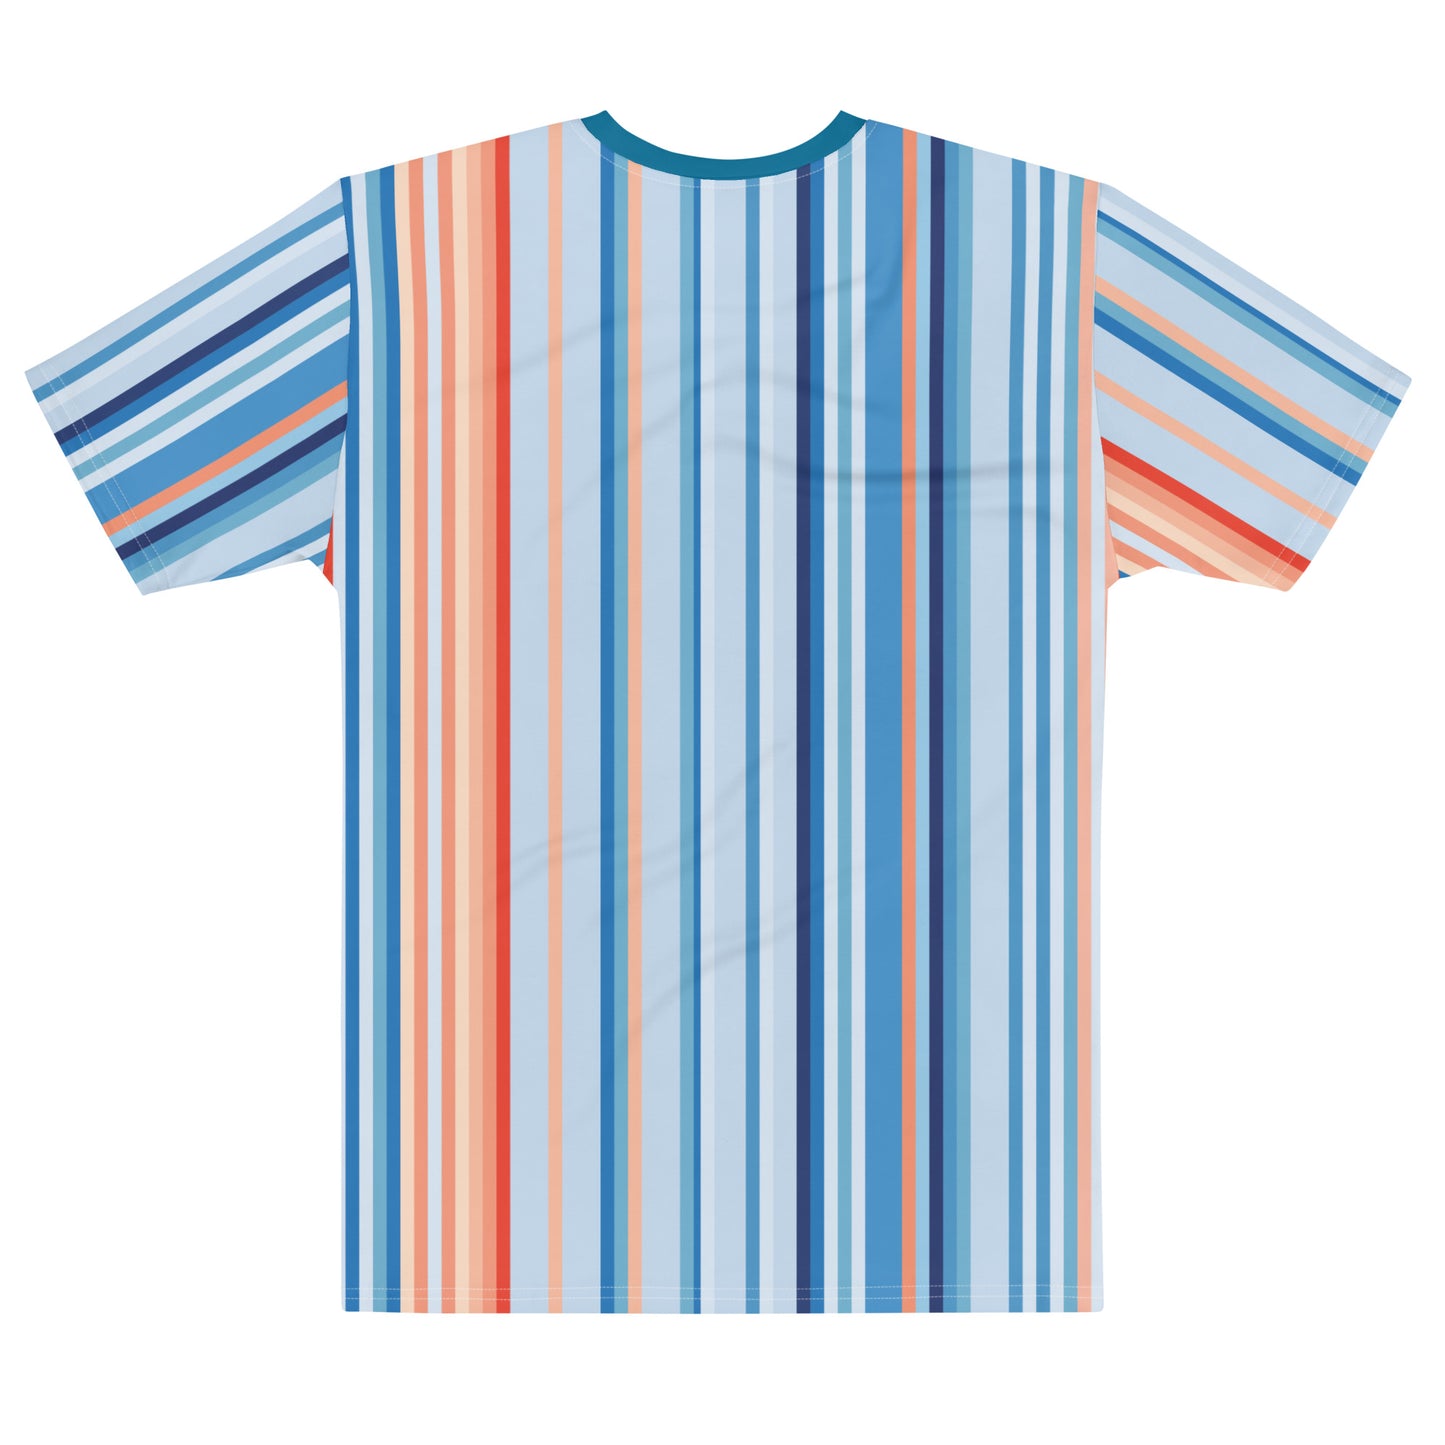 Climate Change Global Warming Stripes - Sustainably Made Men's T-shirt vertical